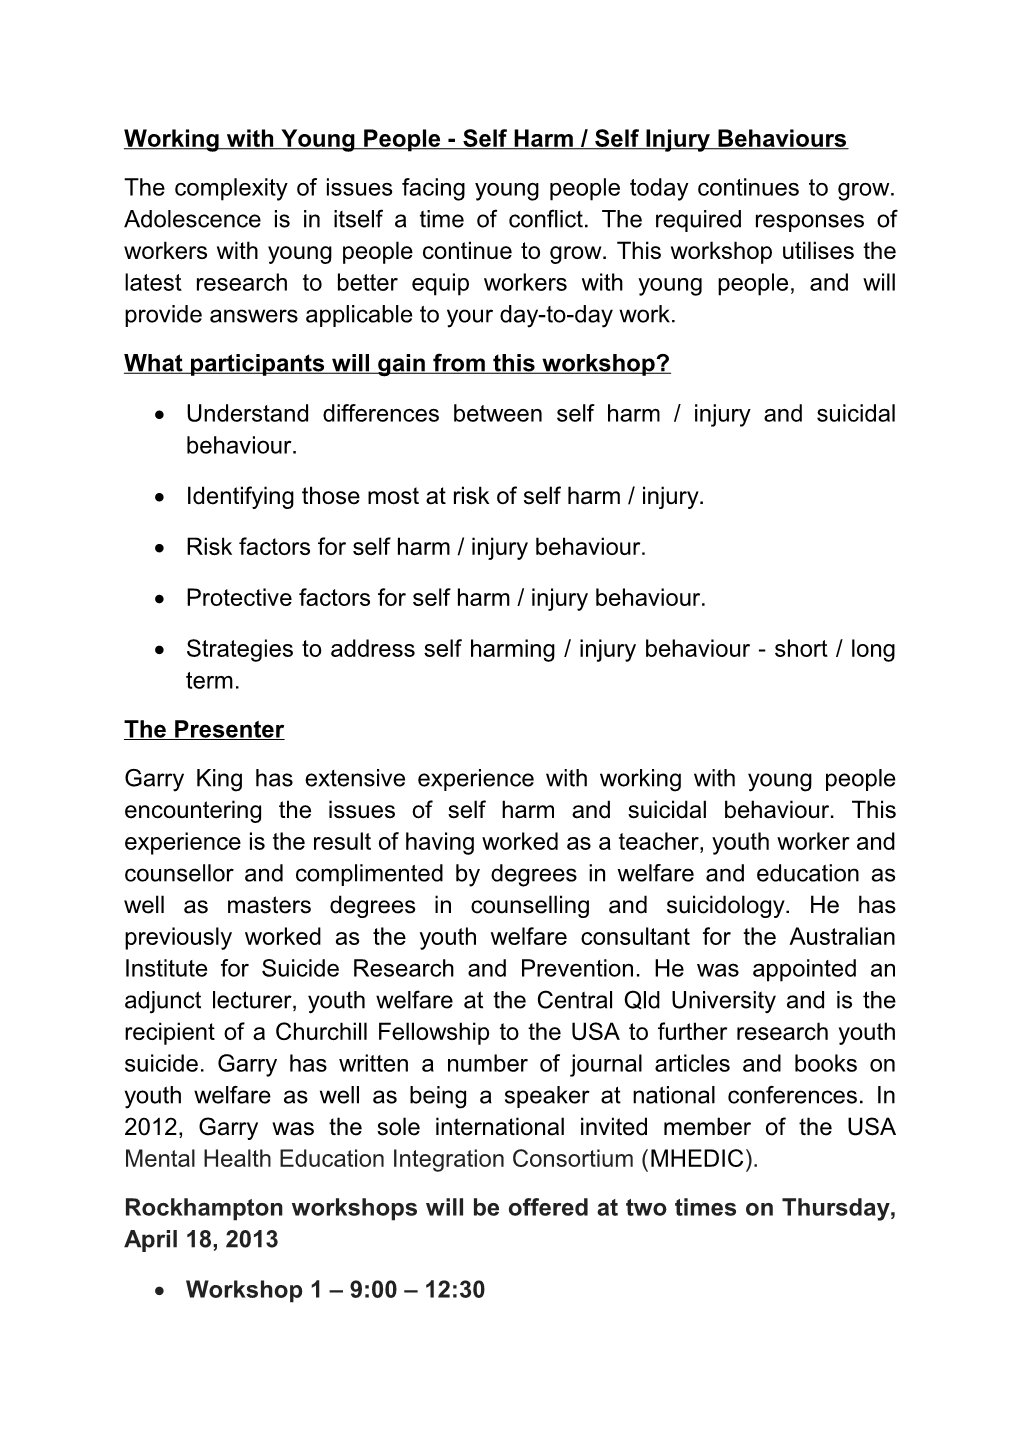 Working with Young People - Self Harm / Self Injury Behaviours